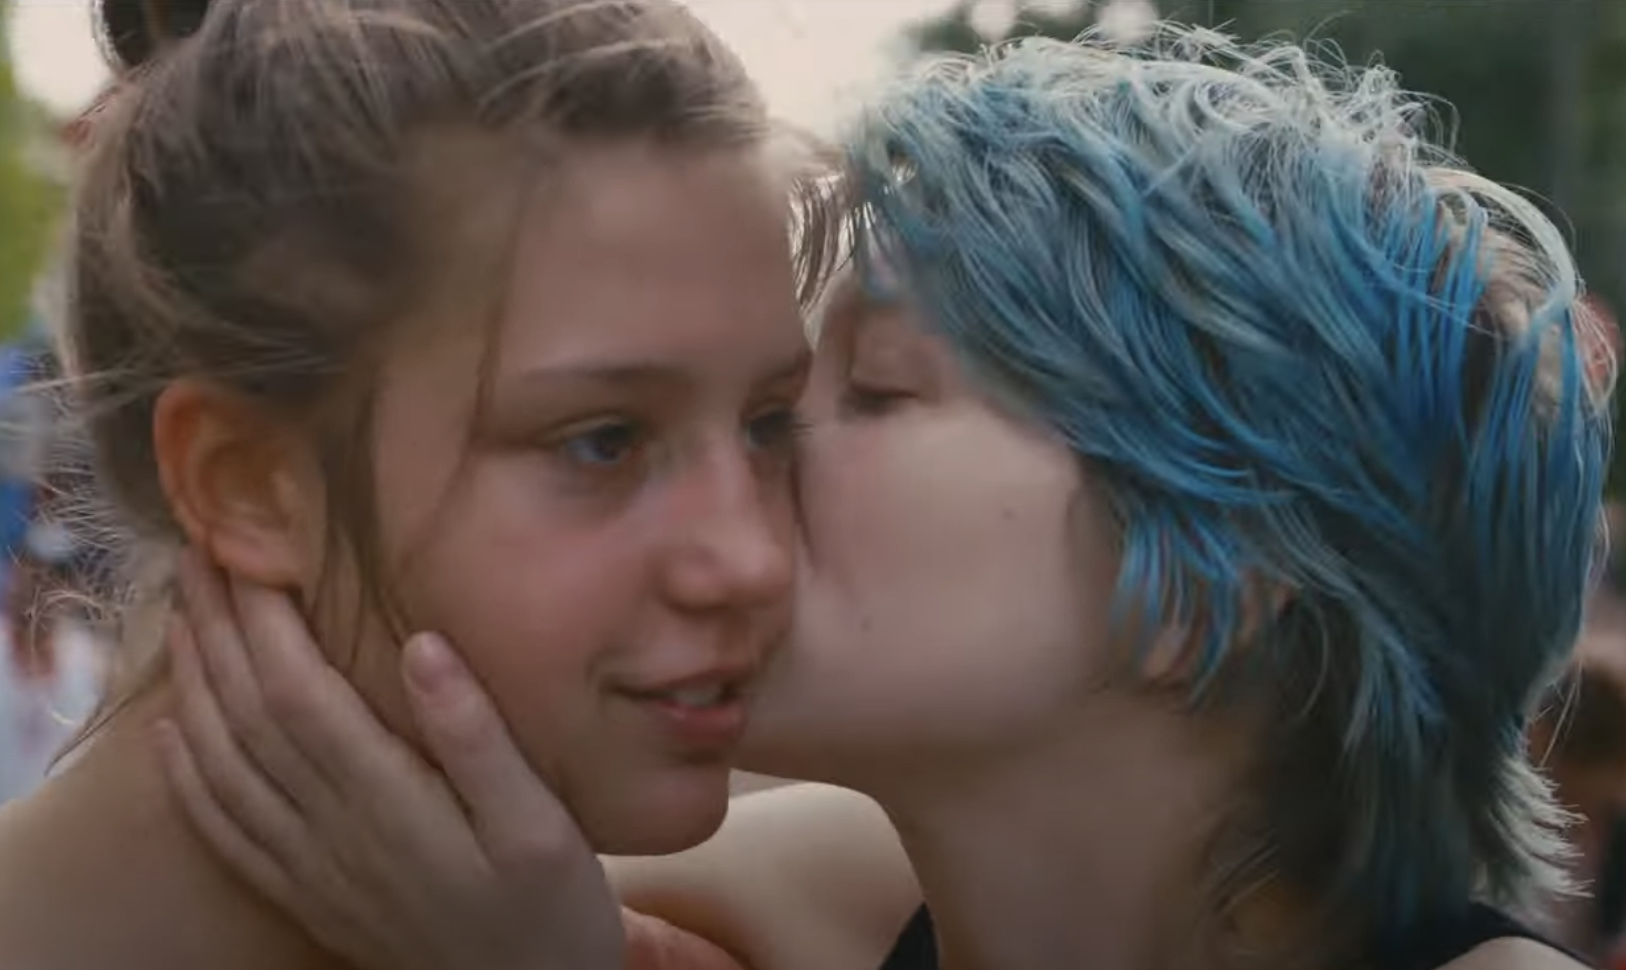 Seydoux and Exarchopoulos kissing